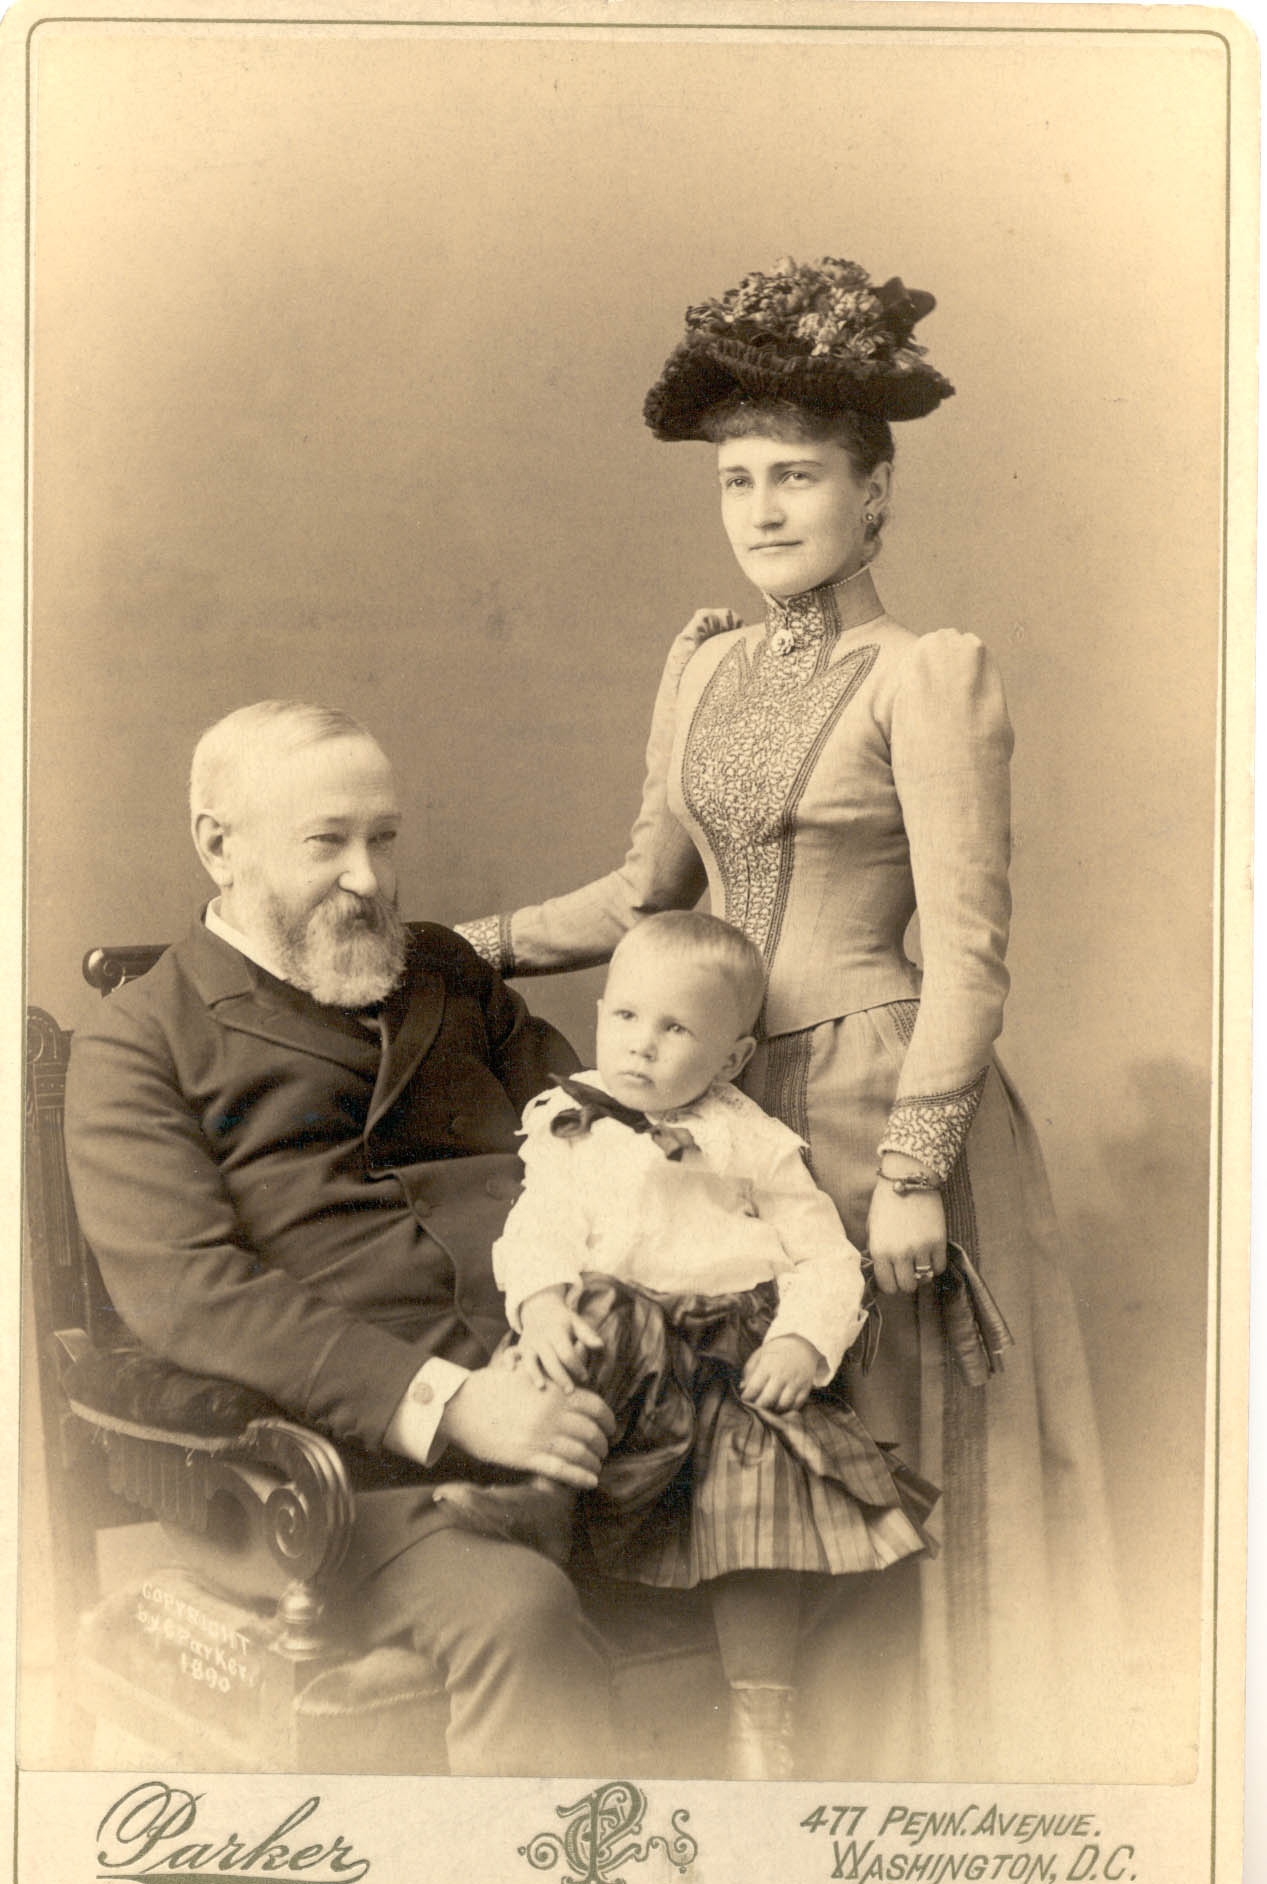 Harrison, daughter Mary McKee and grandson Baby McKee.